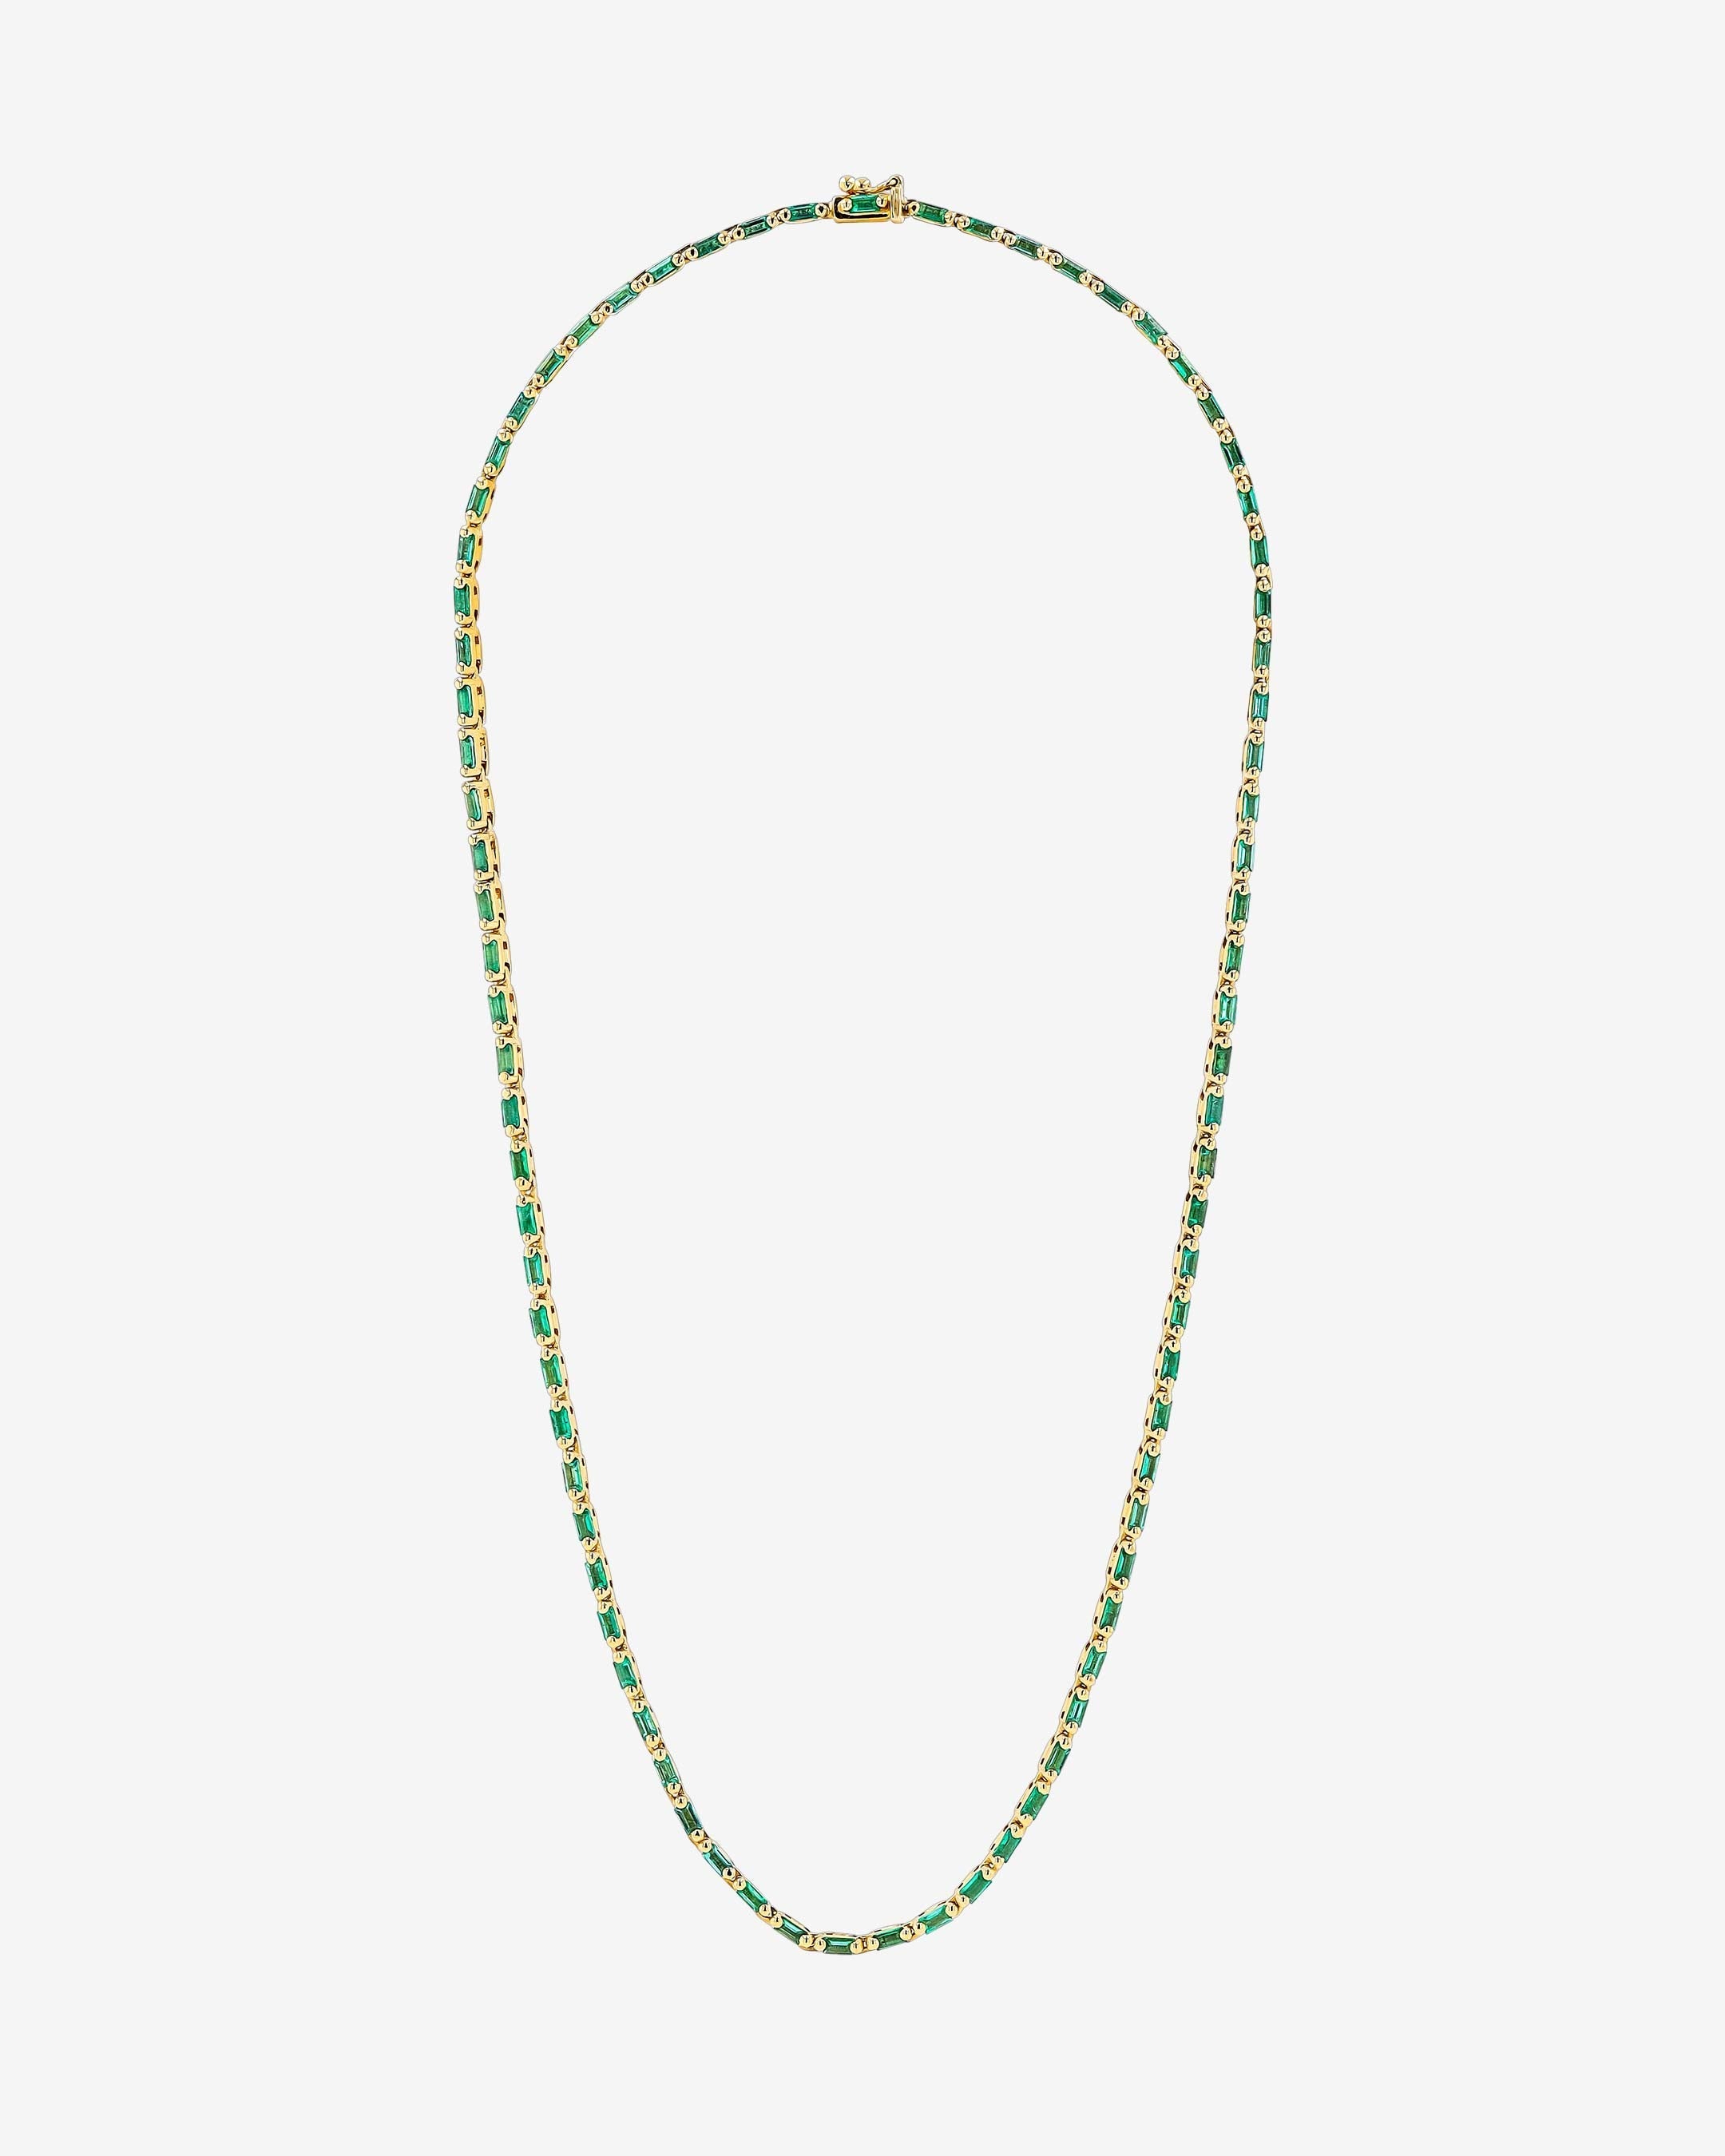 Suzanne Kalan Linear Full Emerald  Tennis Necklace in 18k yellow gold